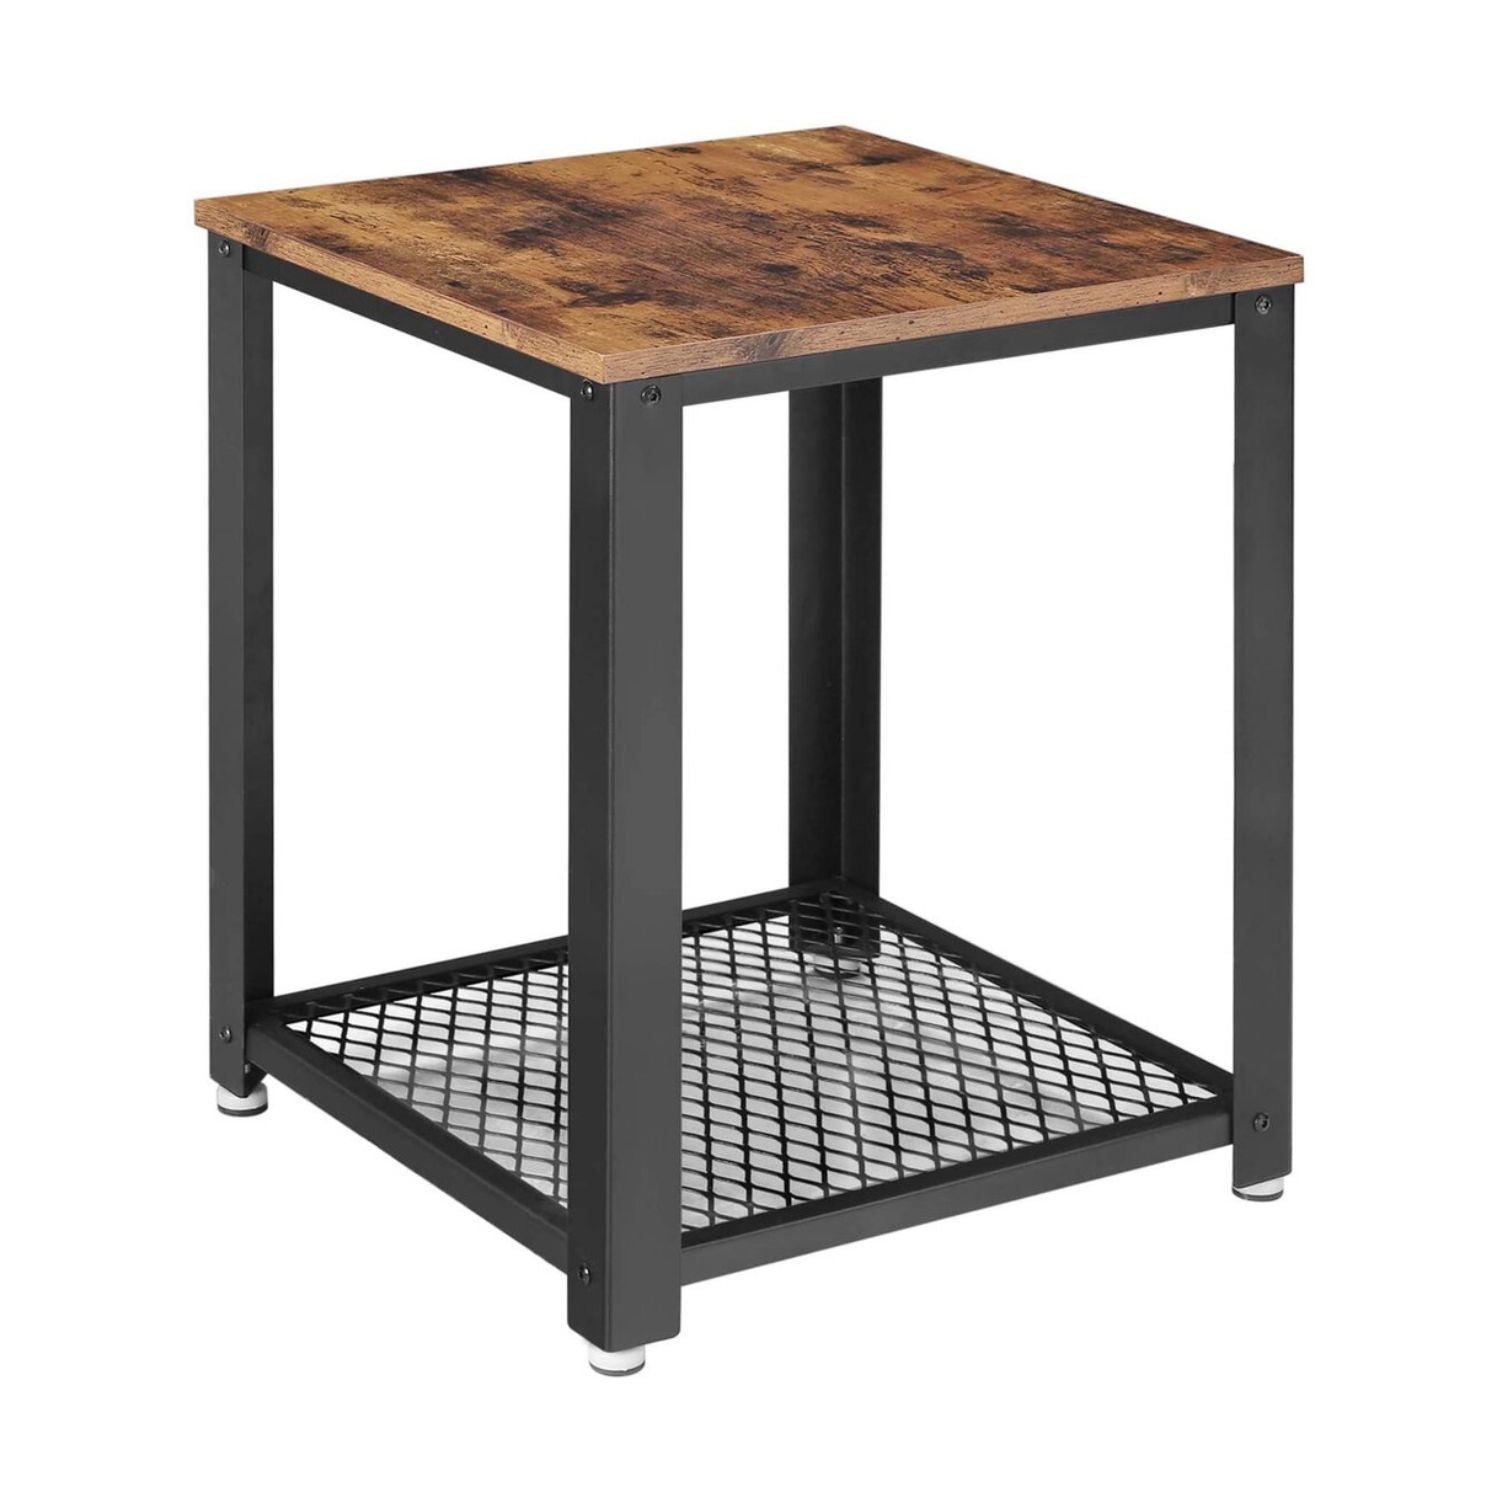 VASAGLE Coffee Table with Mesh Shelf Rustic Brown and Black